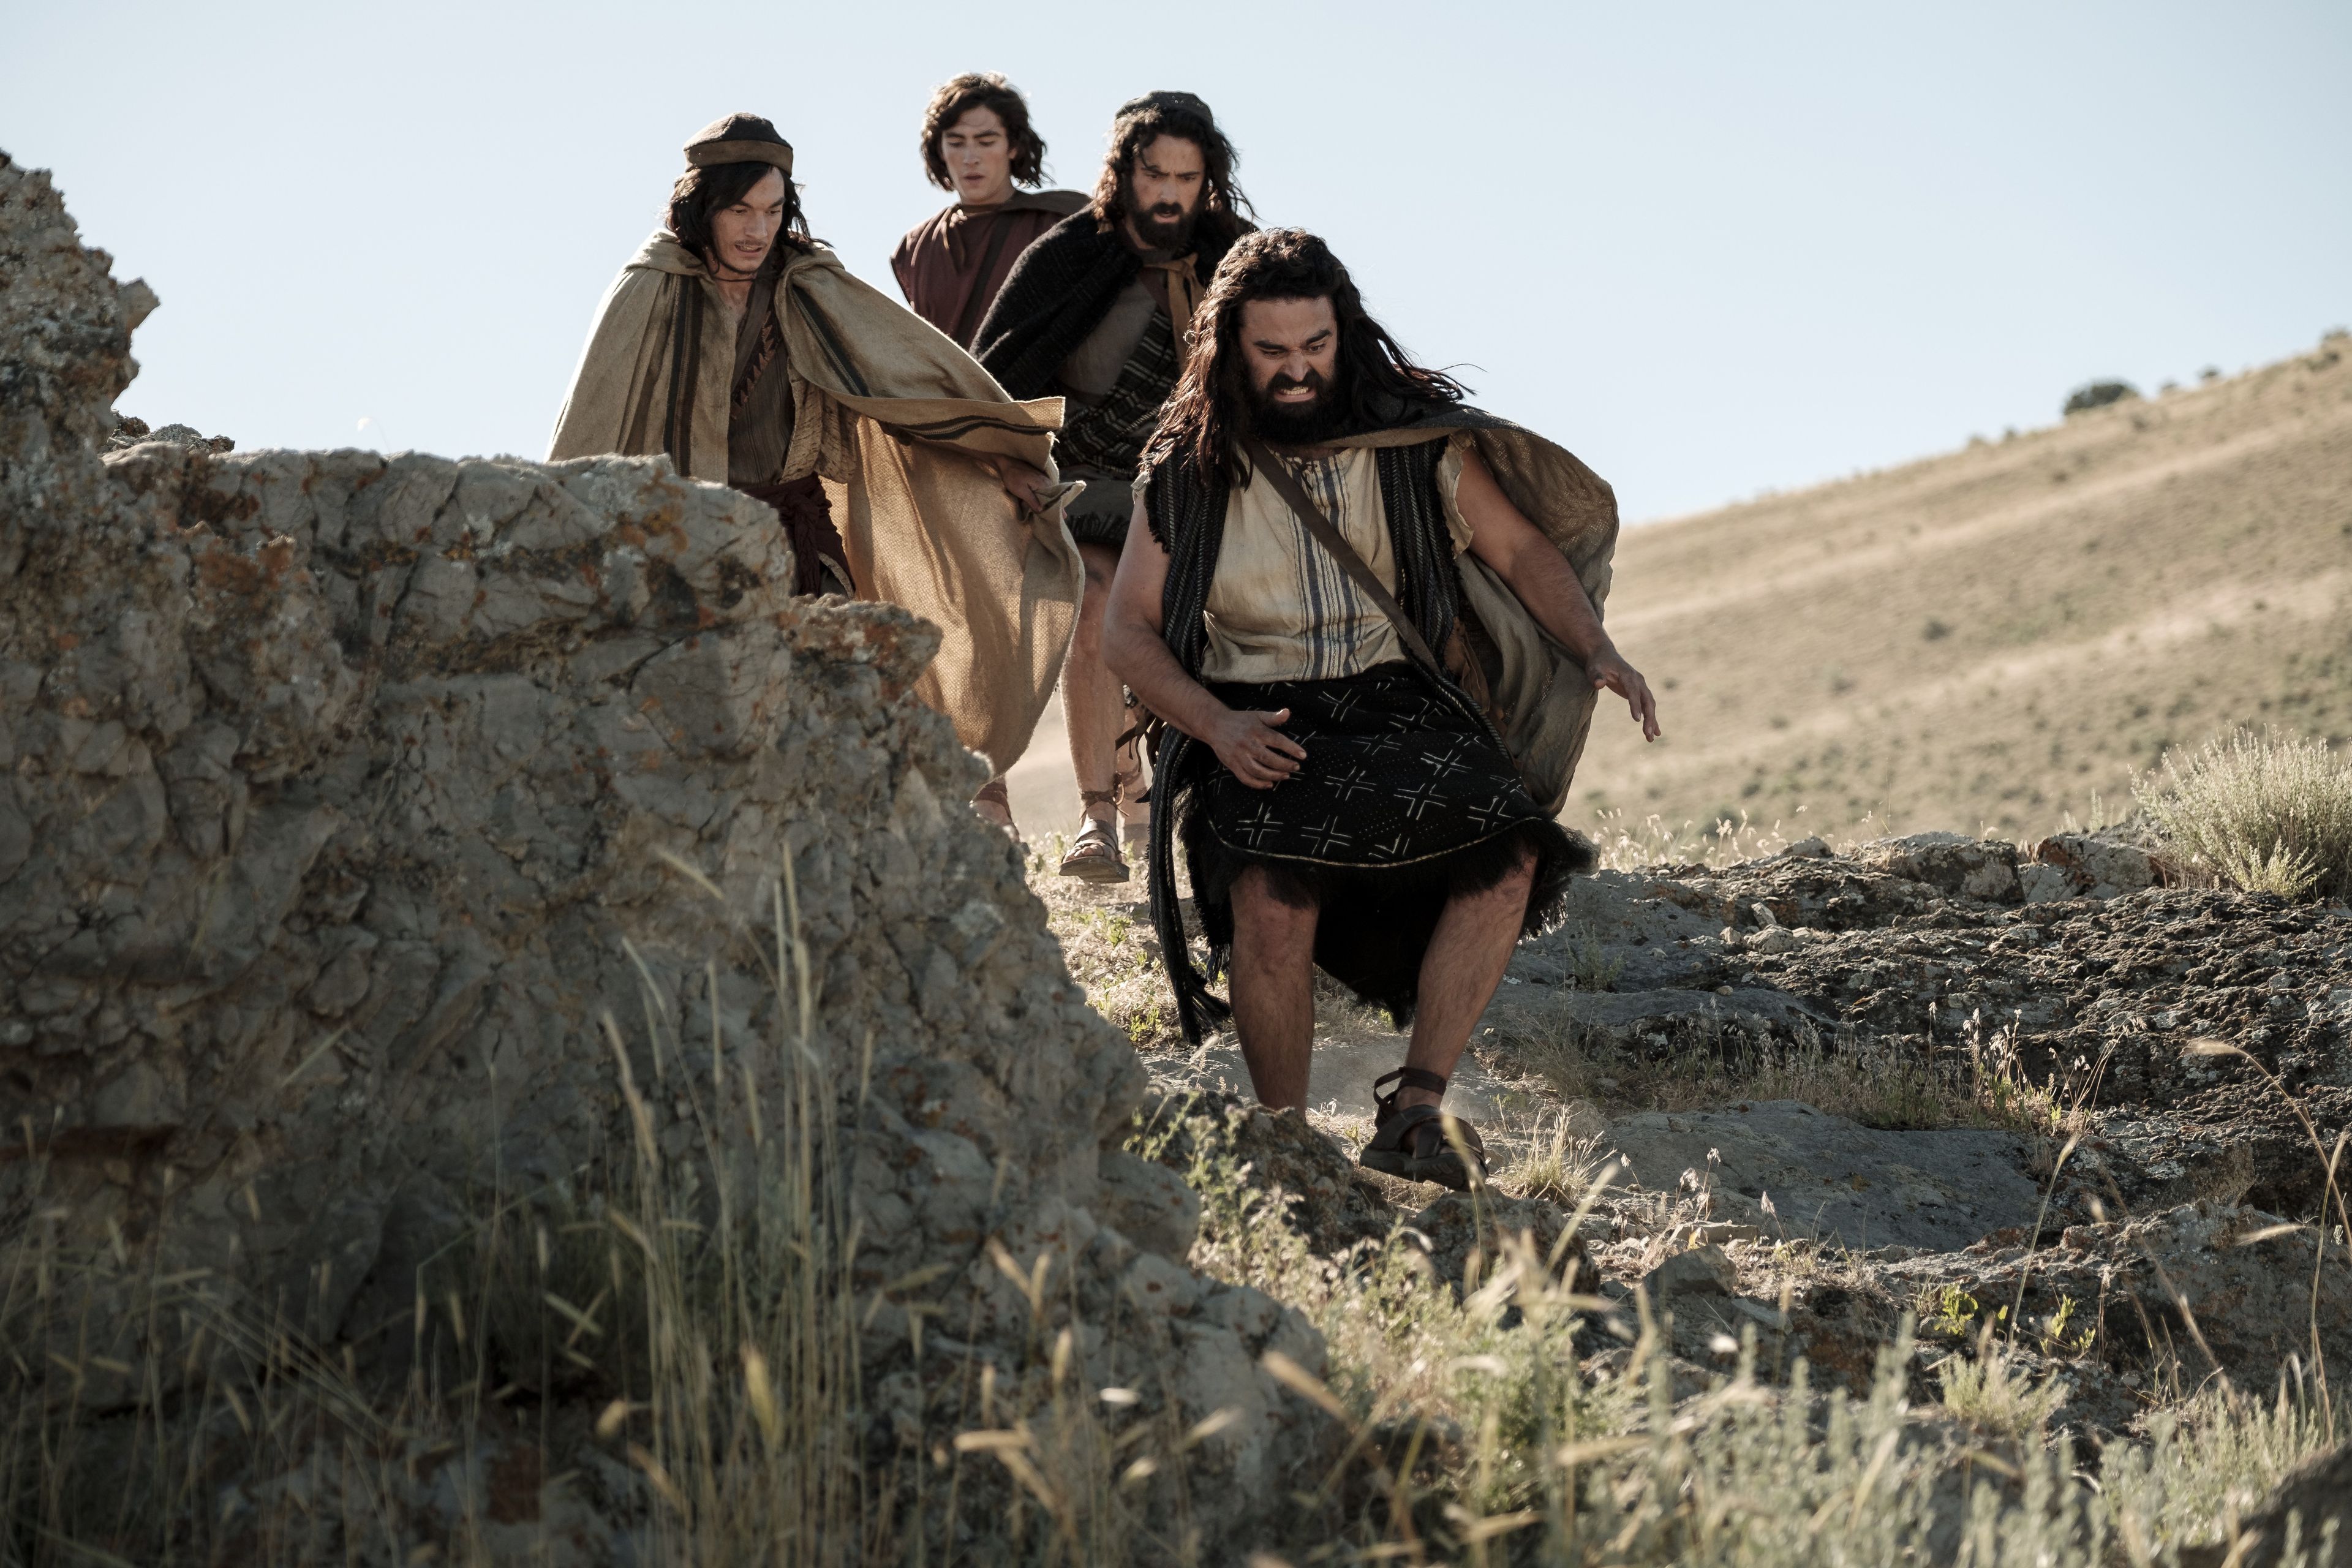 Nephi and his brothers flee from Laban's guards.